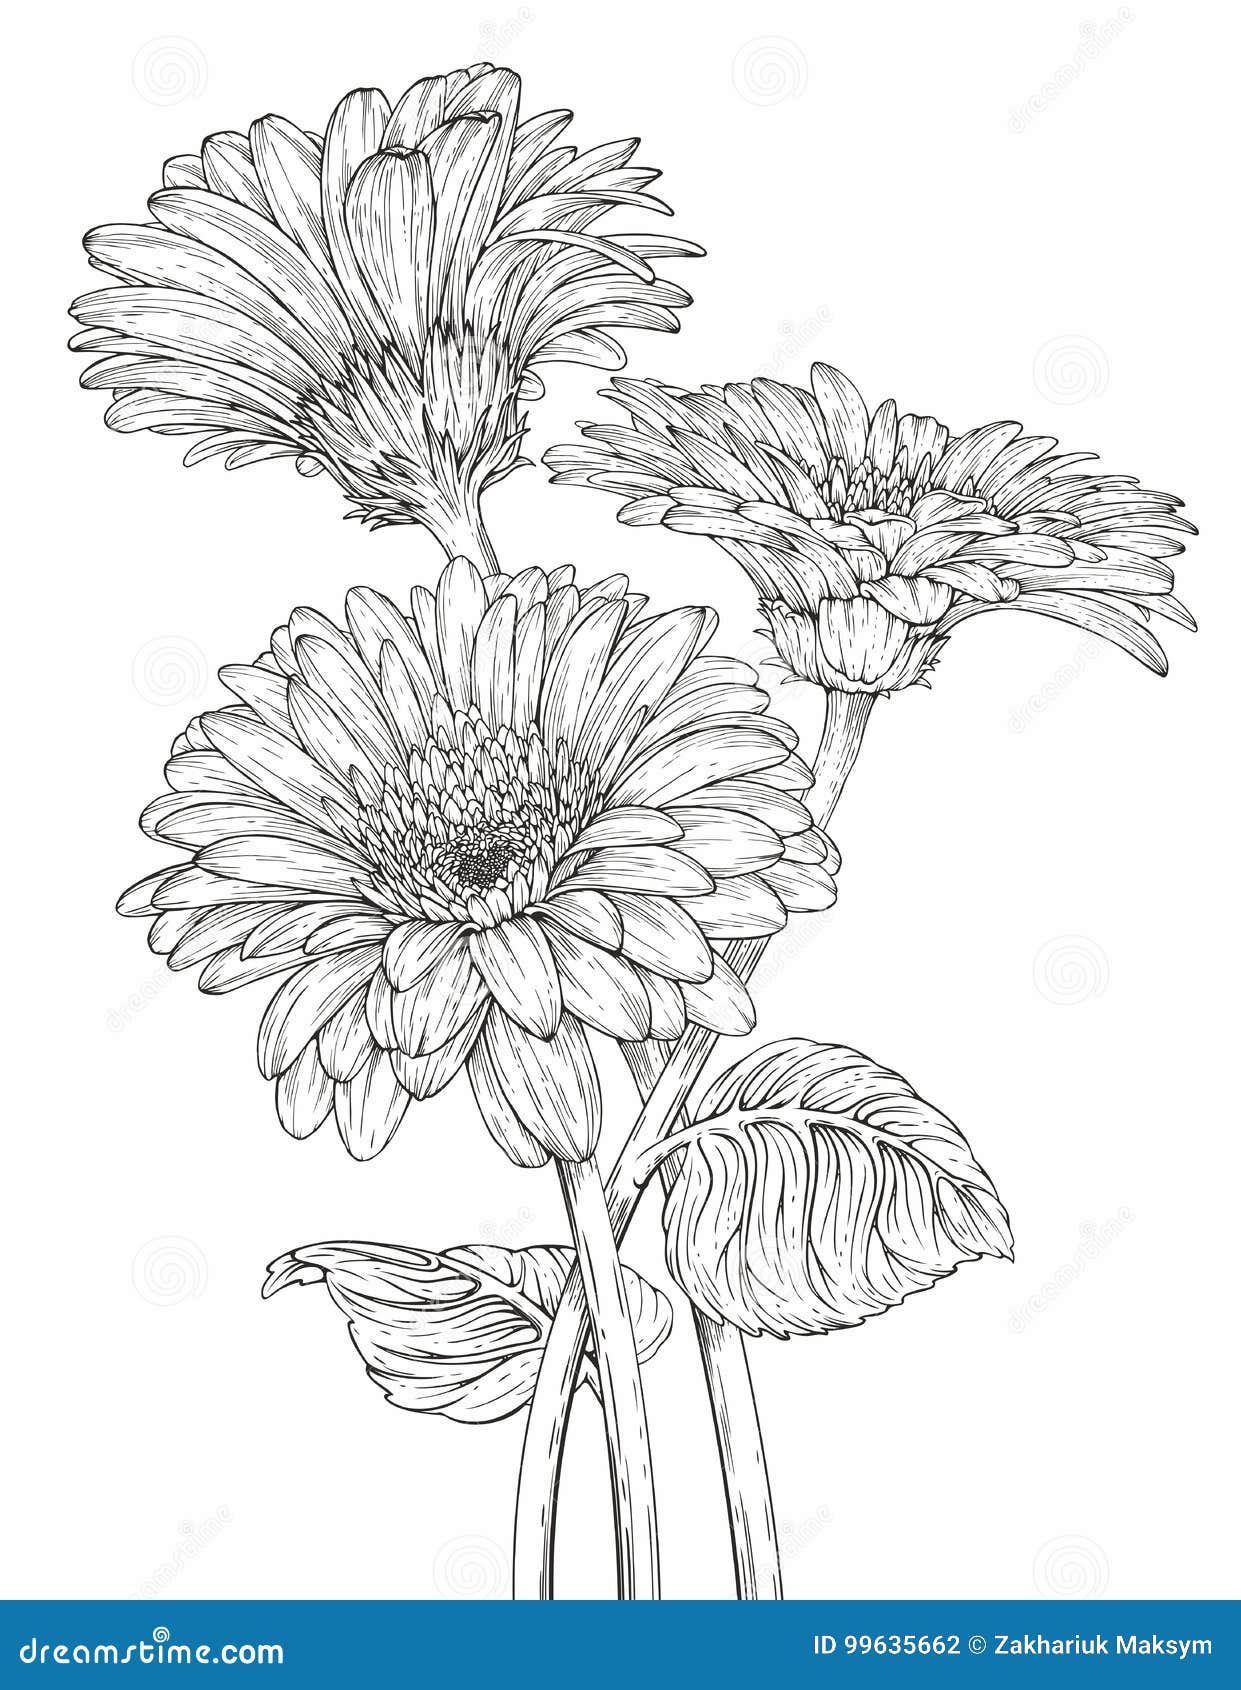 Lovely How To Draw A Gerbera Daisy Step By Step - hd wallpaper